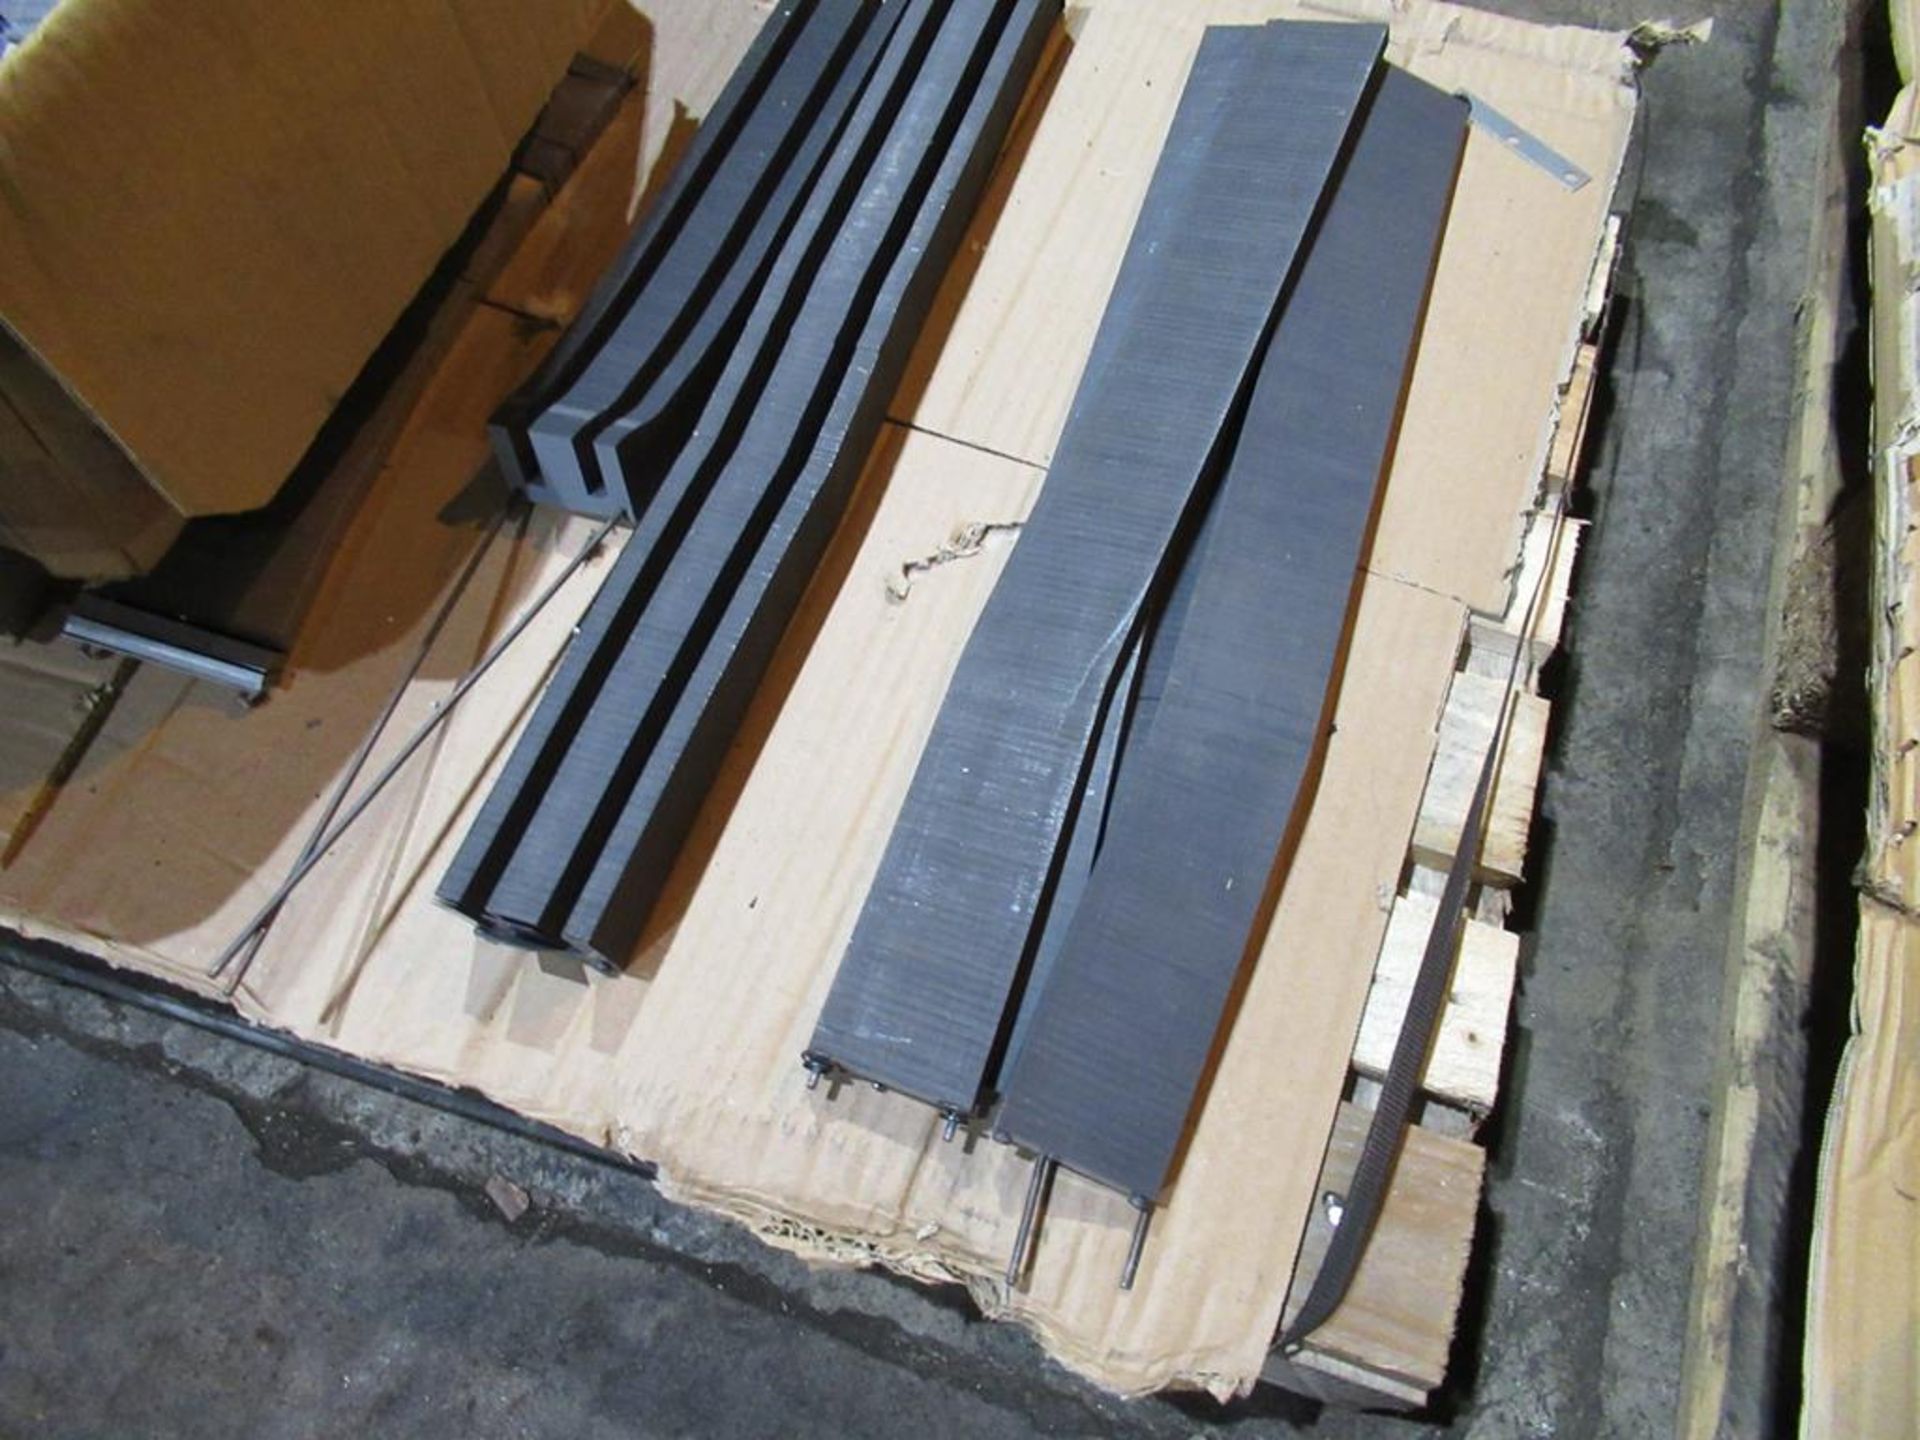 Lot of 12kg EI 54 UNILCIL Laminations and 10 Kg EI 75 Linlox Laminations - Image 3 of 3